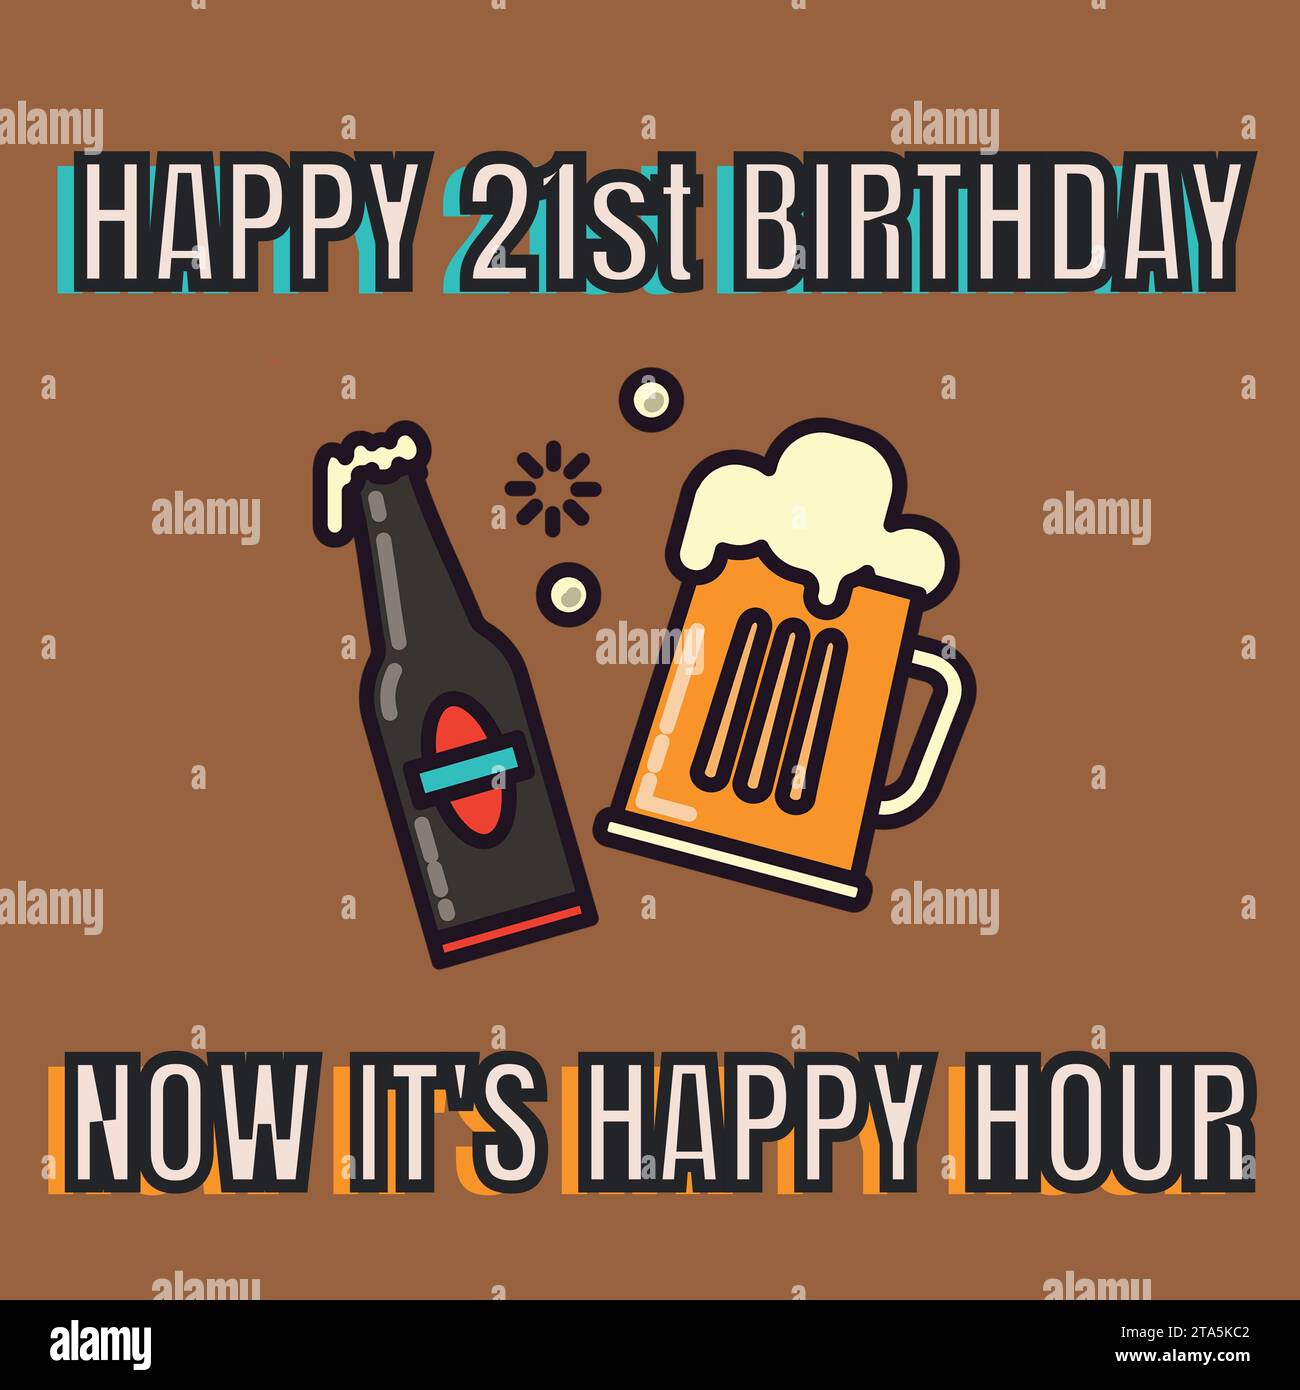 Composite of happy 21st birthday text over beer glass and bottle on brown background Stock Photo